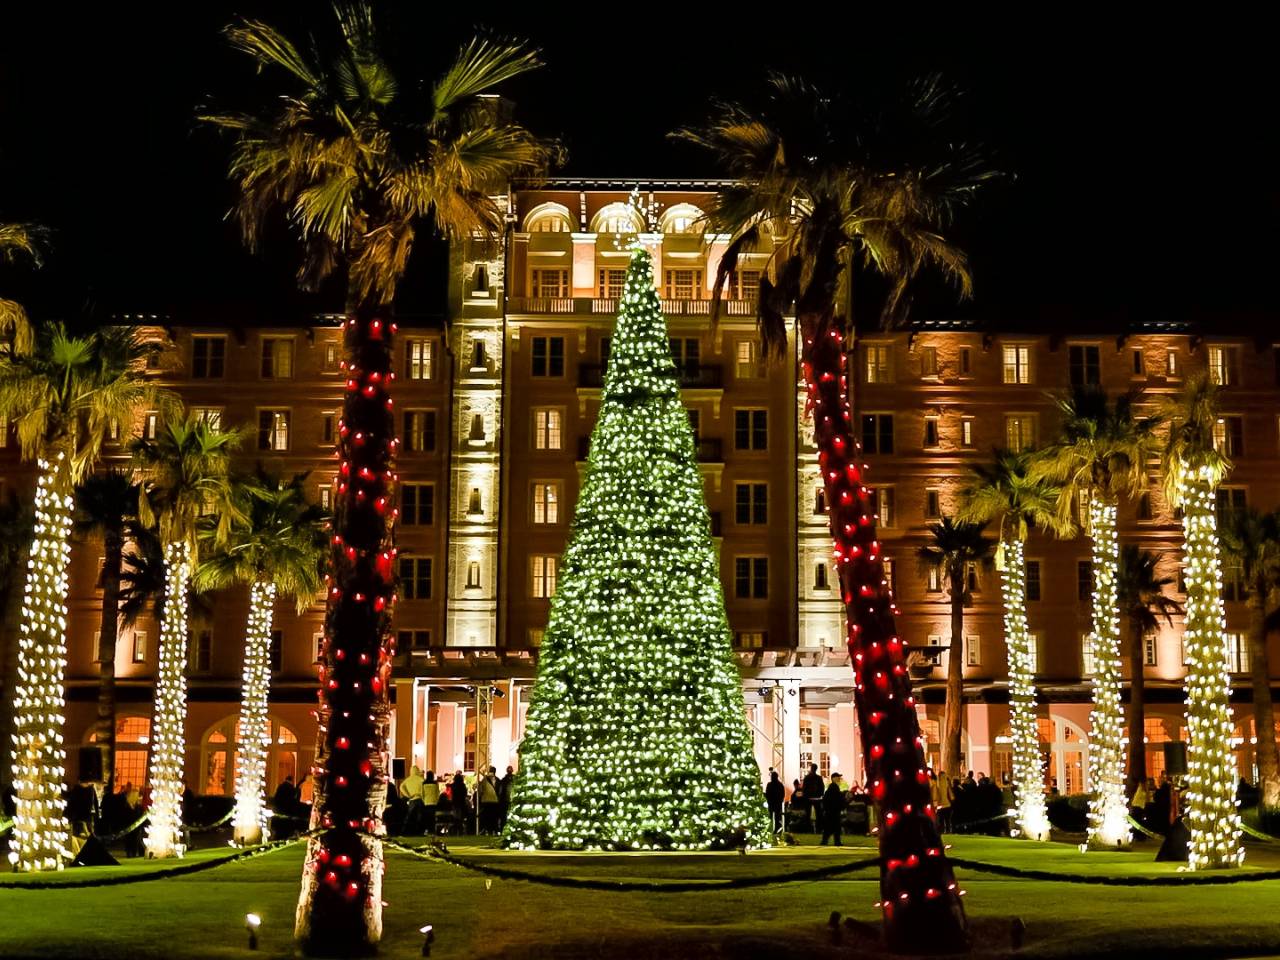 Christmas tree illuminated in hundreds of lights surrounded by palm trees wrapped in lights in front of the Grand Galvez